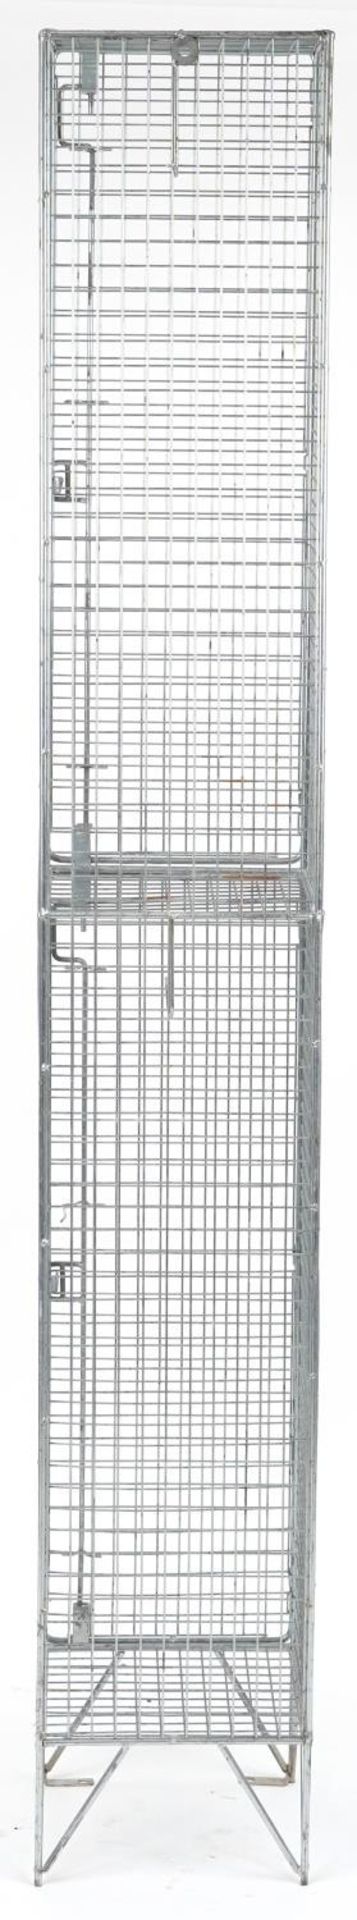 Industrial steel wire cage, 198cm H x 31cm W x 31cm D - Image 3 of 3